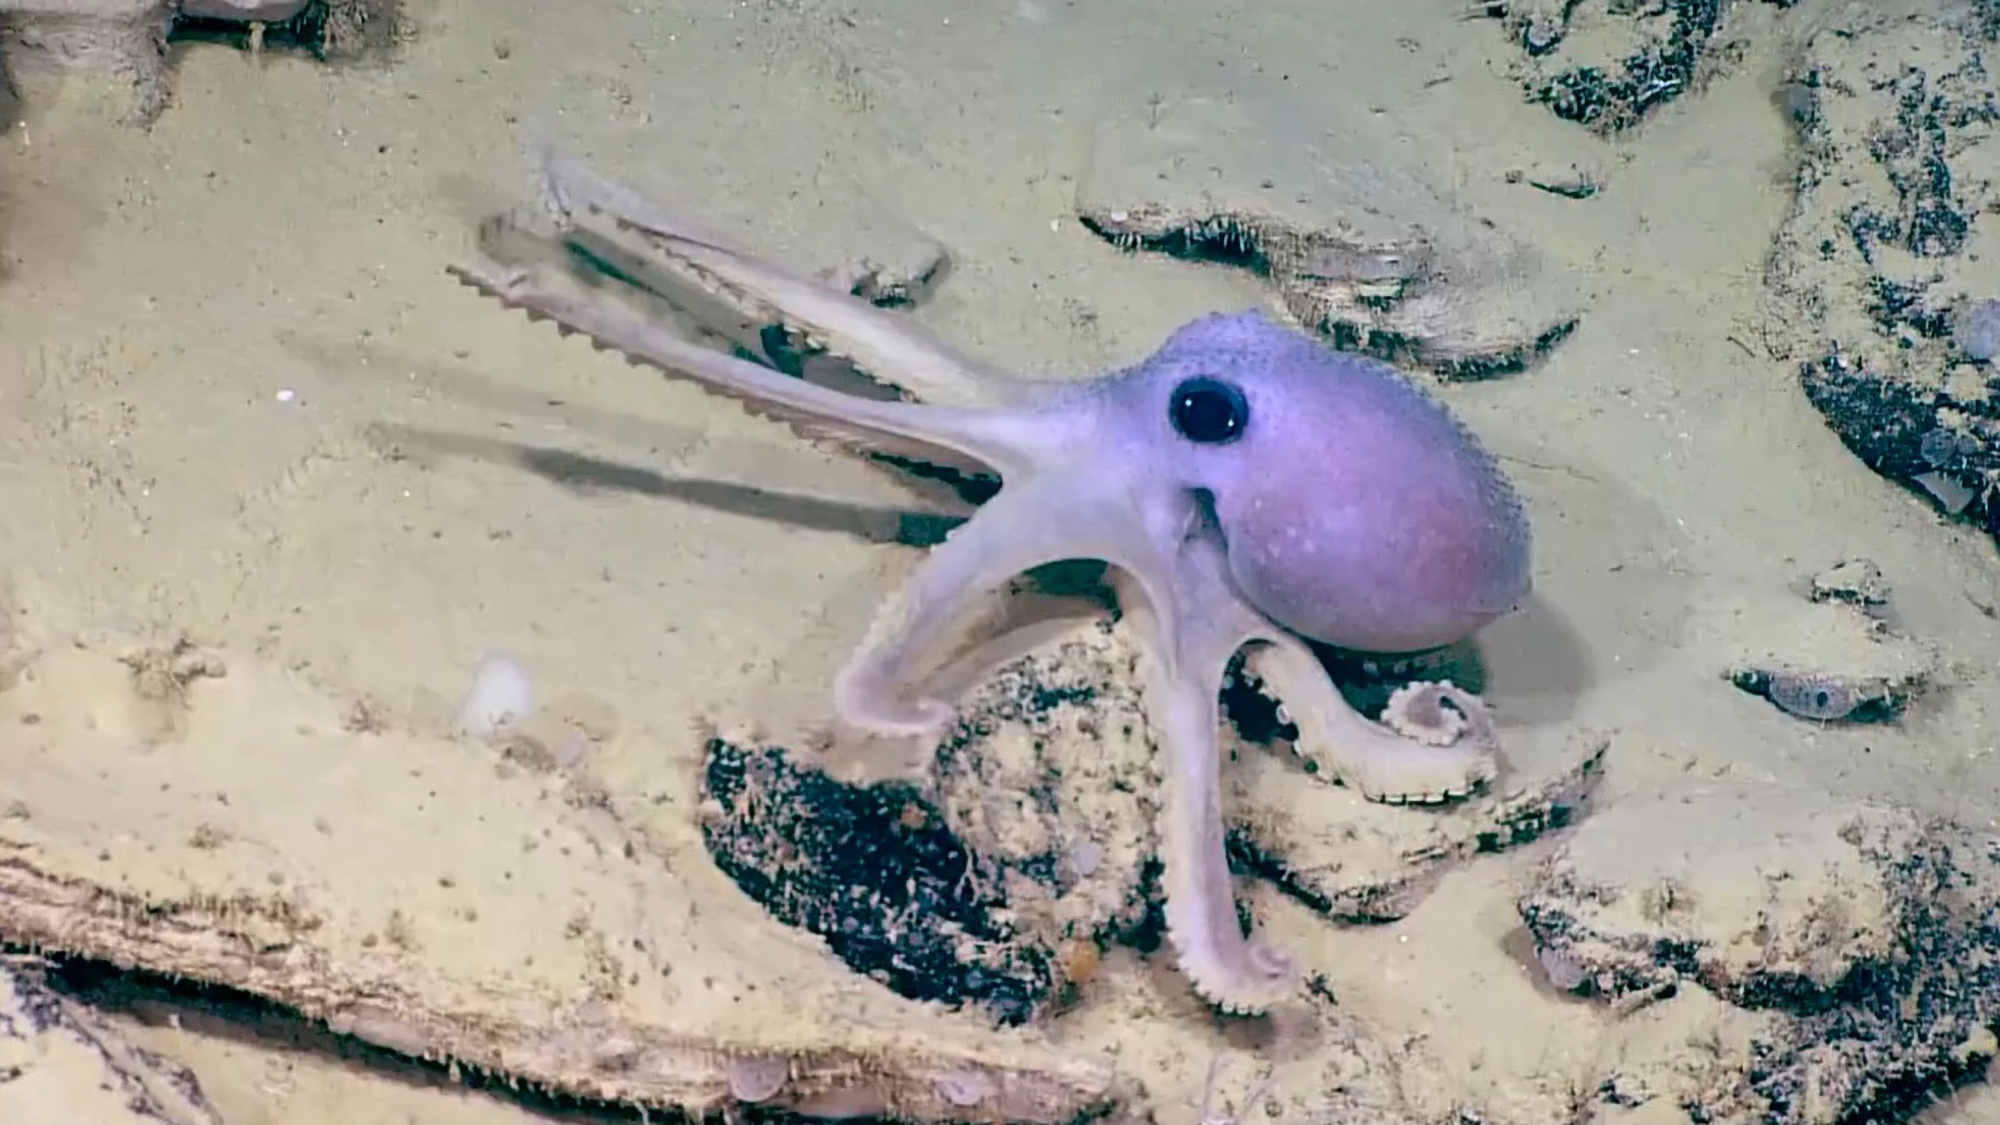 Read more about the article HALLOWEEN HORRORS: Boffins Find Scary Wart-Covered Octopus And Zombie Sponge In Deep Ocean Water